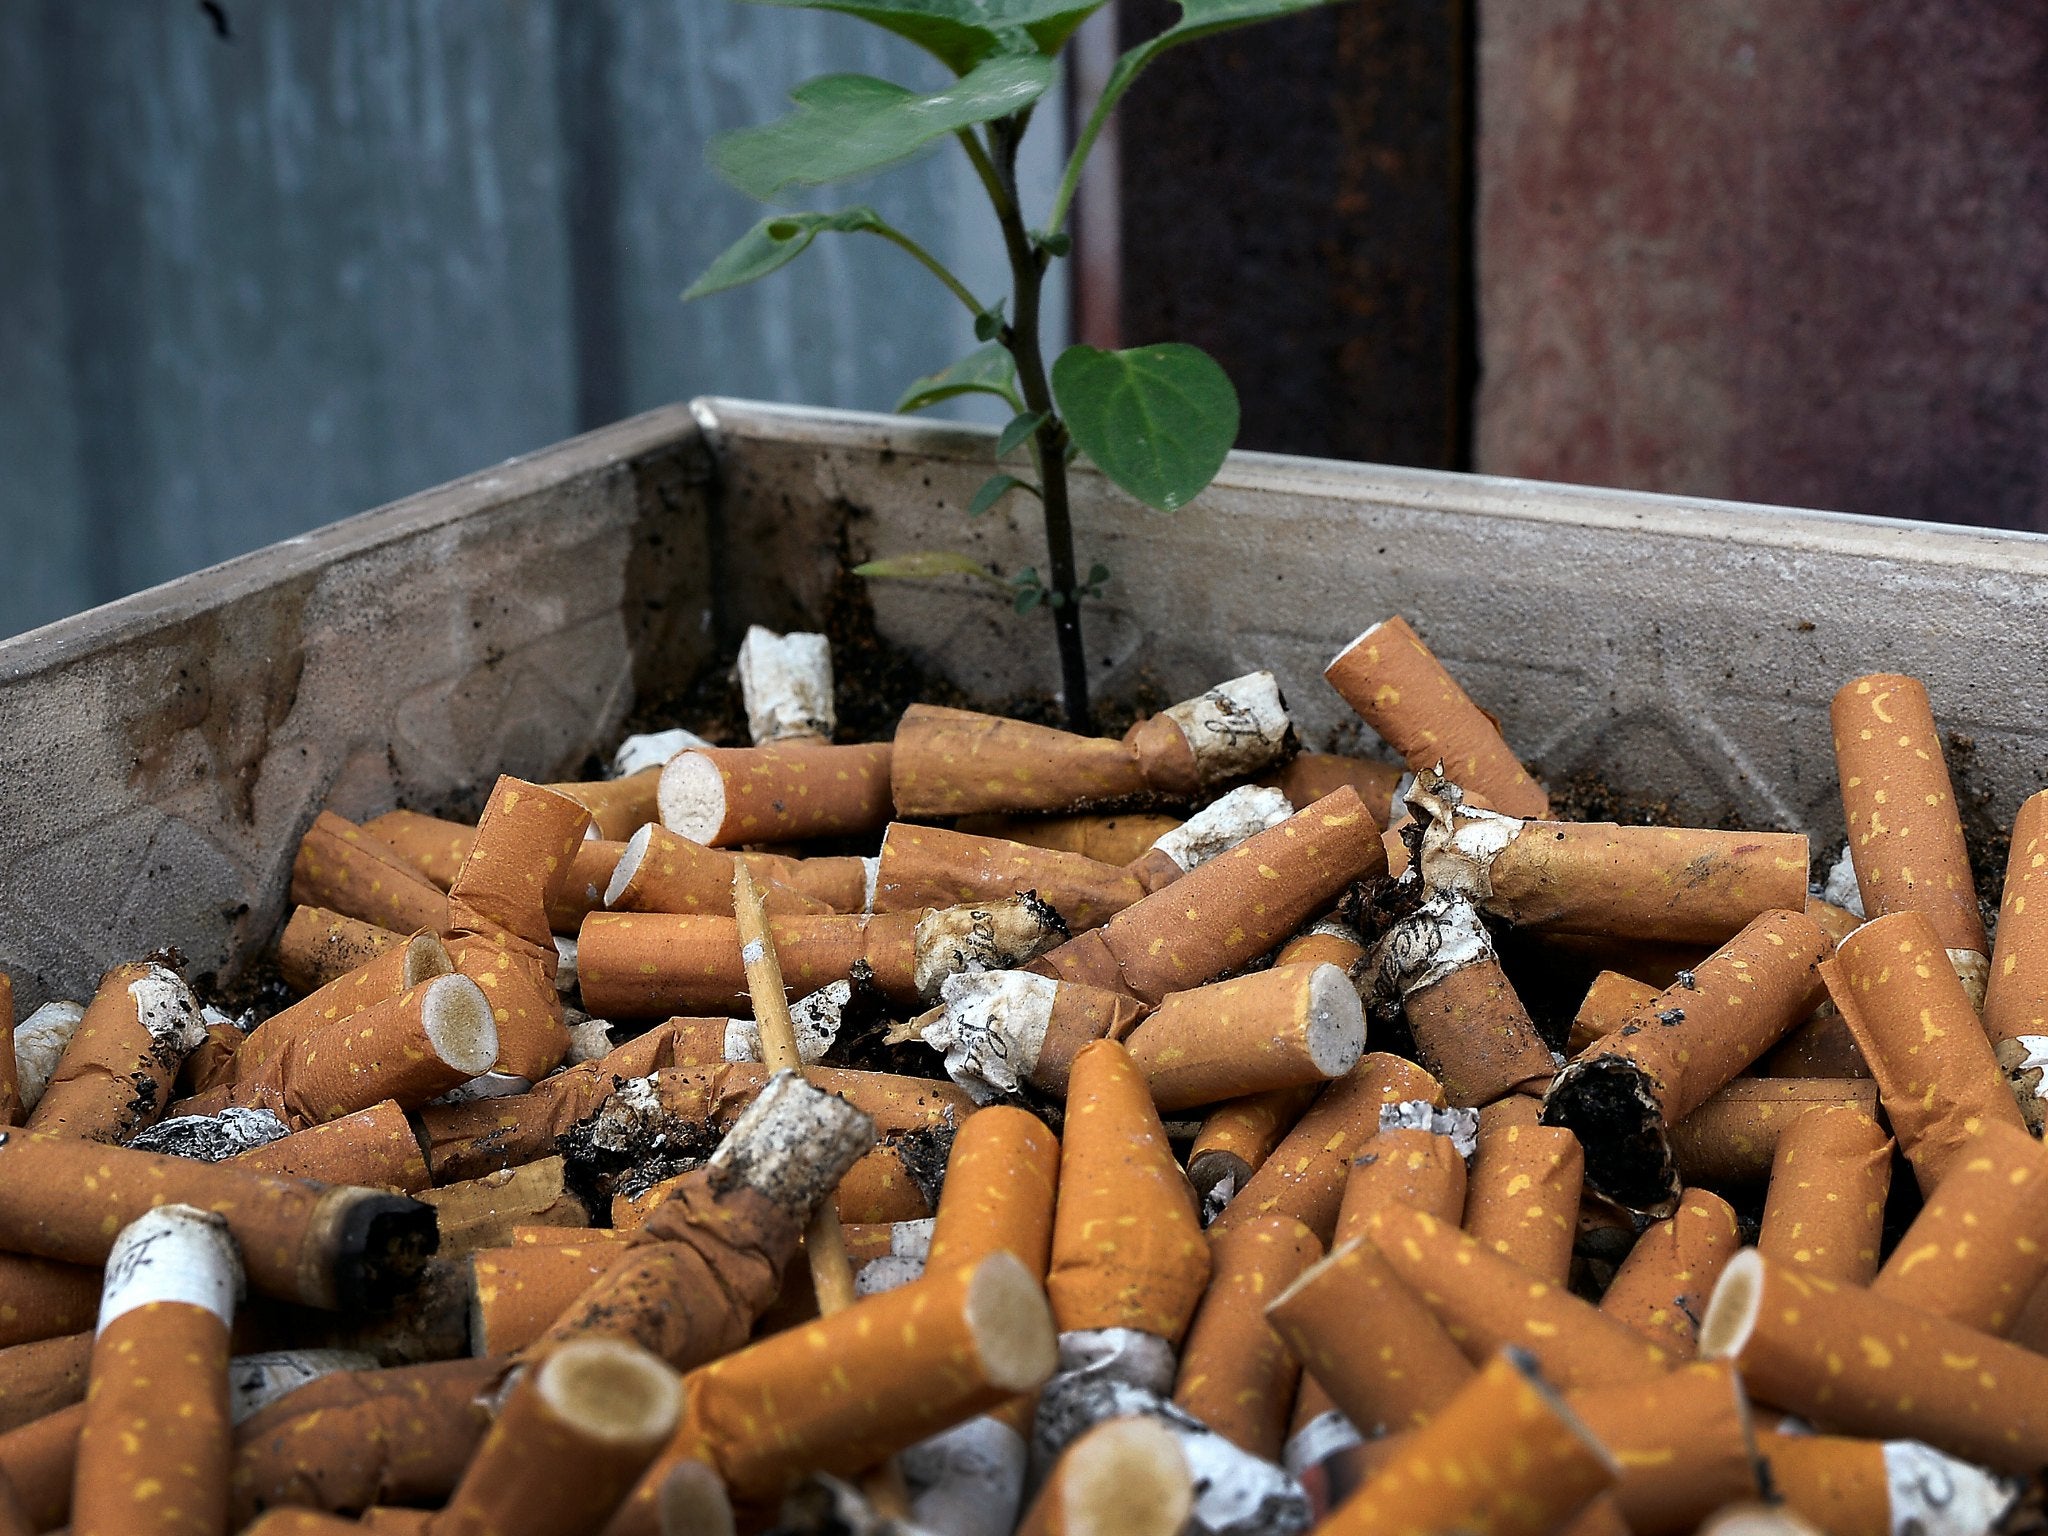 Cigarette butts are seen outside of a club on July 17, 2017